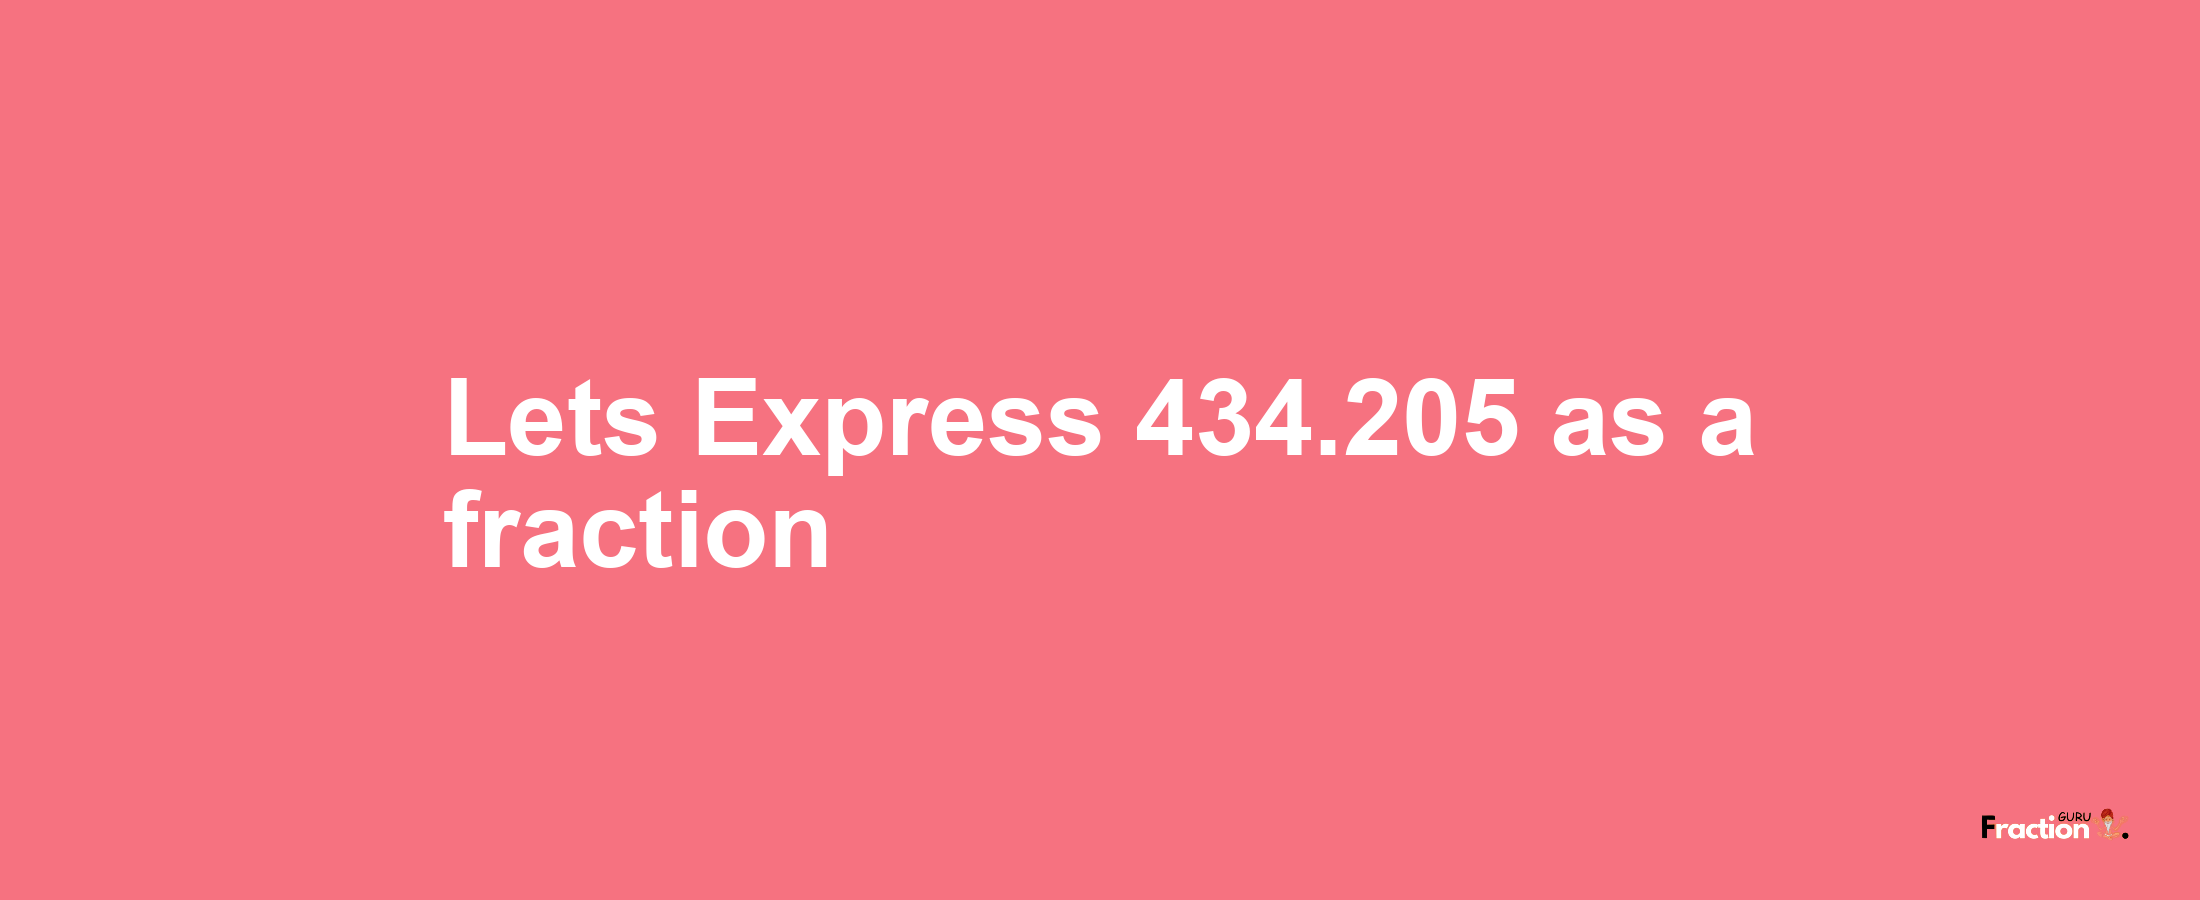 Lets Express 434.205 as afraction